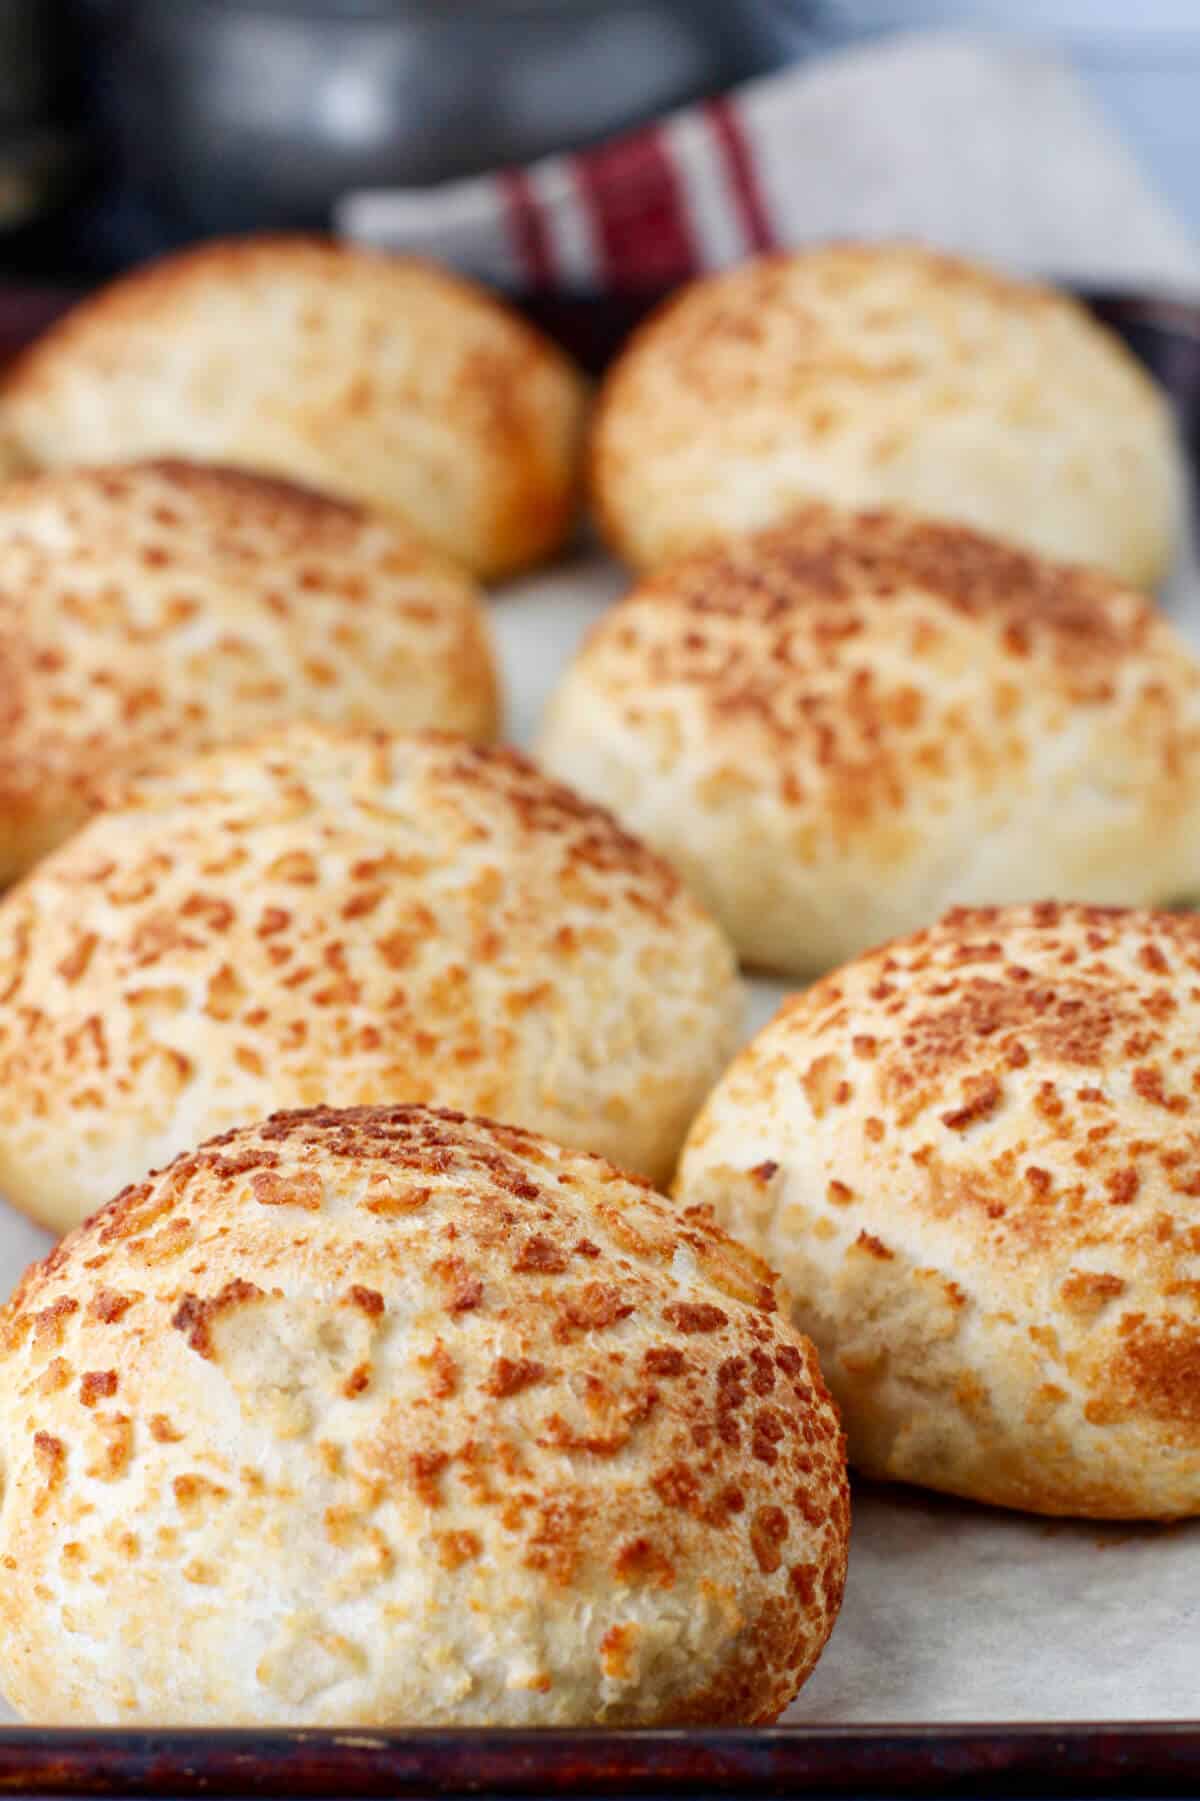 Tiger Bread Rolls after baking with a tiger pattern on the crust.